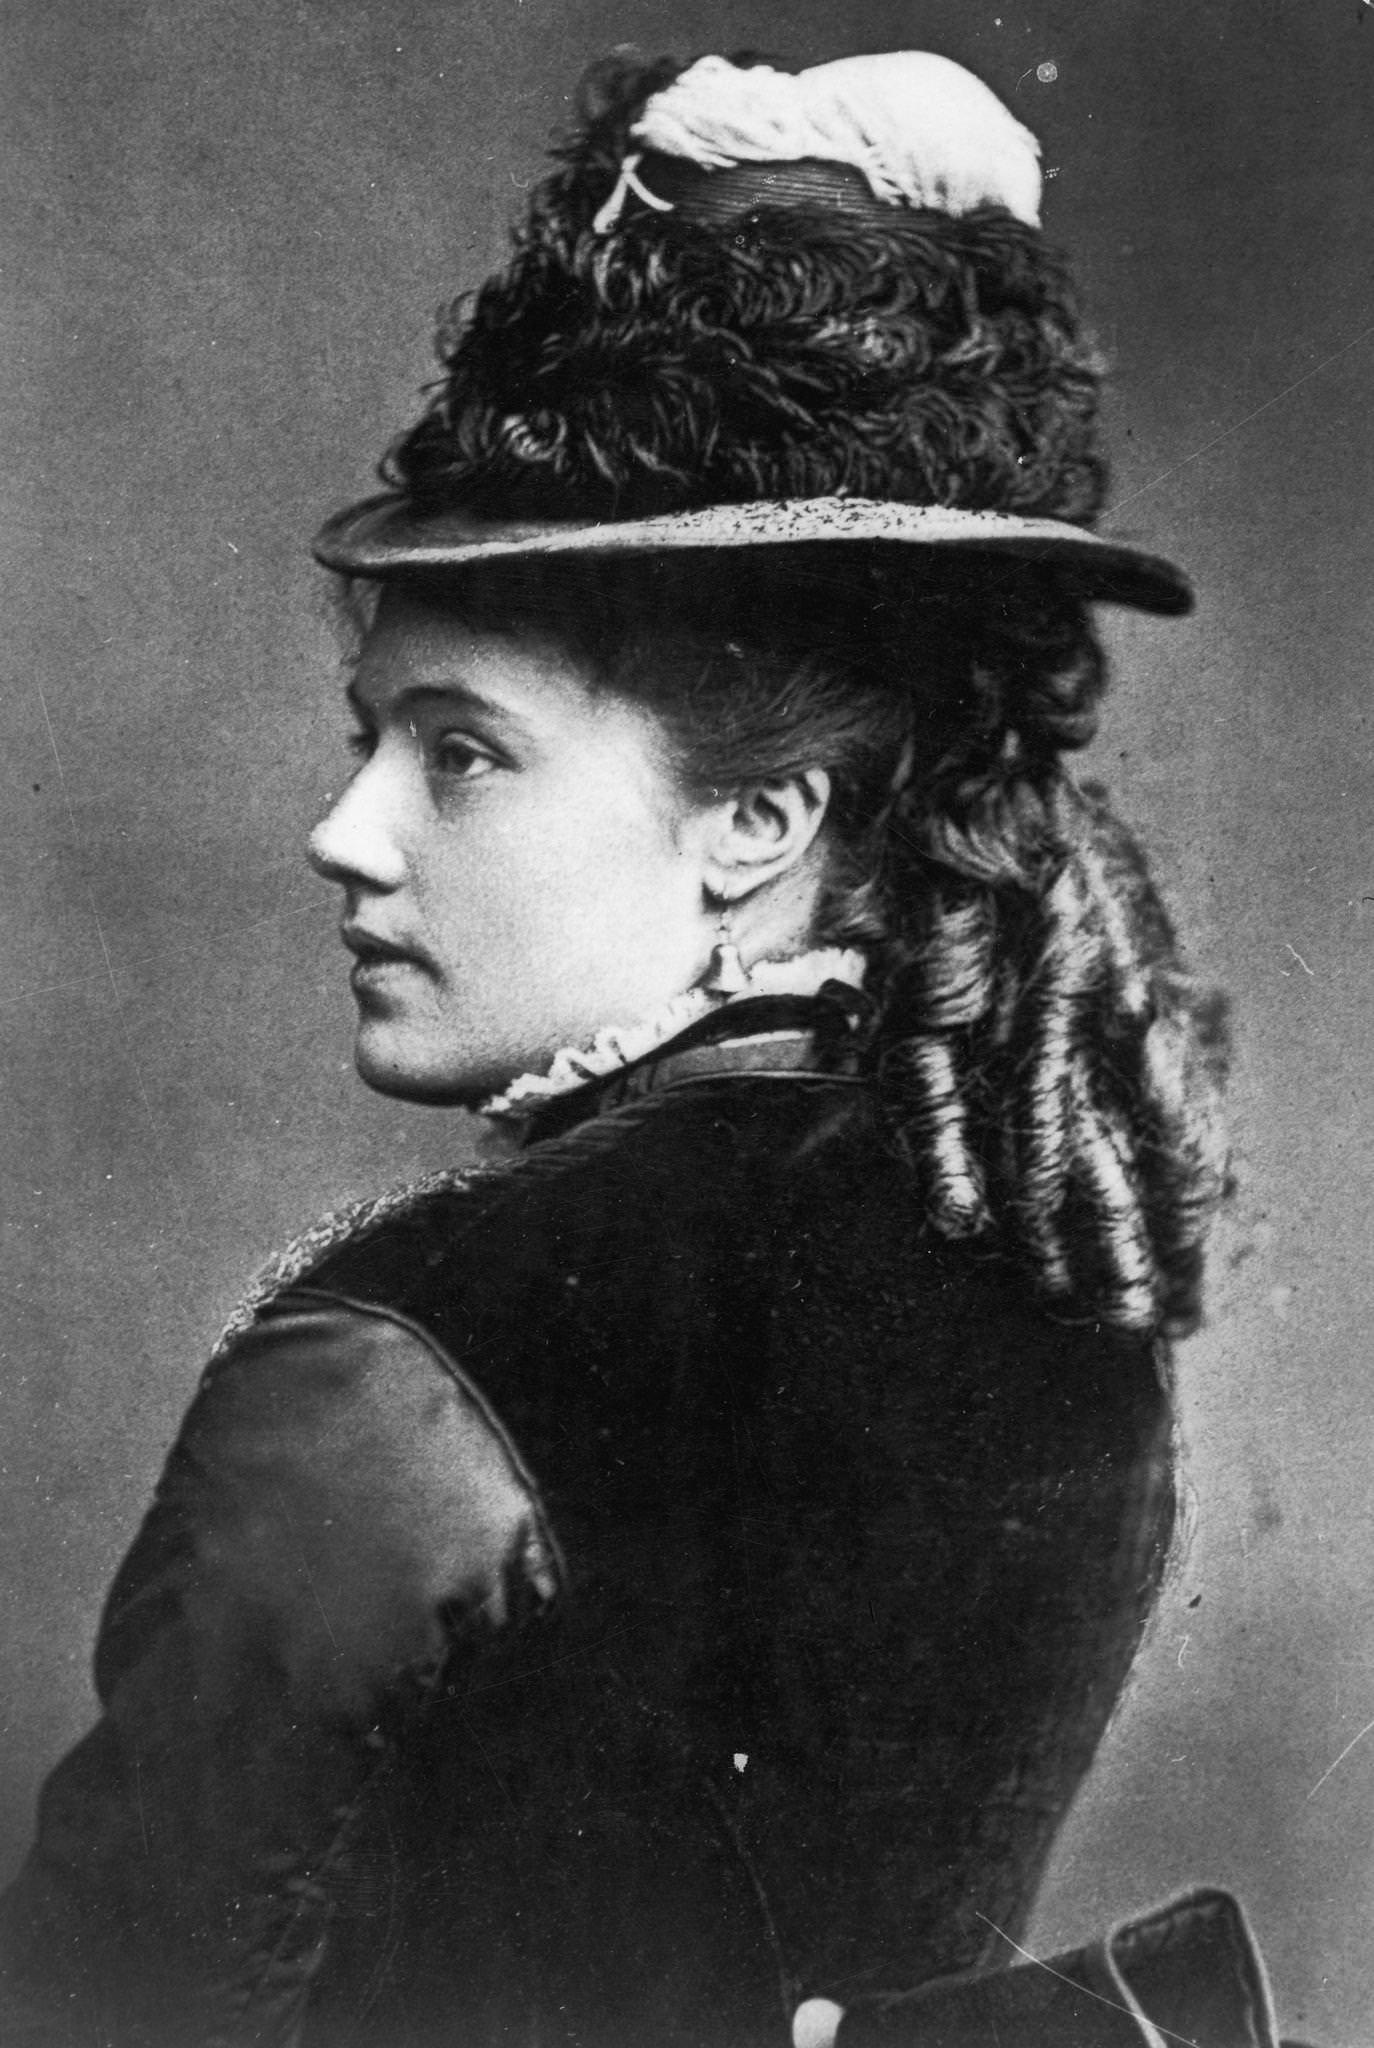 A young woman with her hair in ringlets and wearing bell-shaped earrings and a hat, 1855.